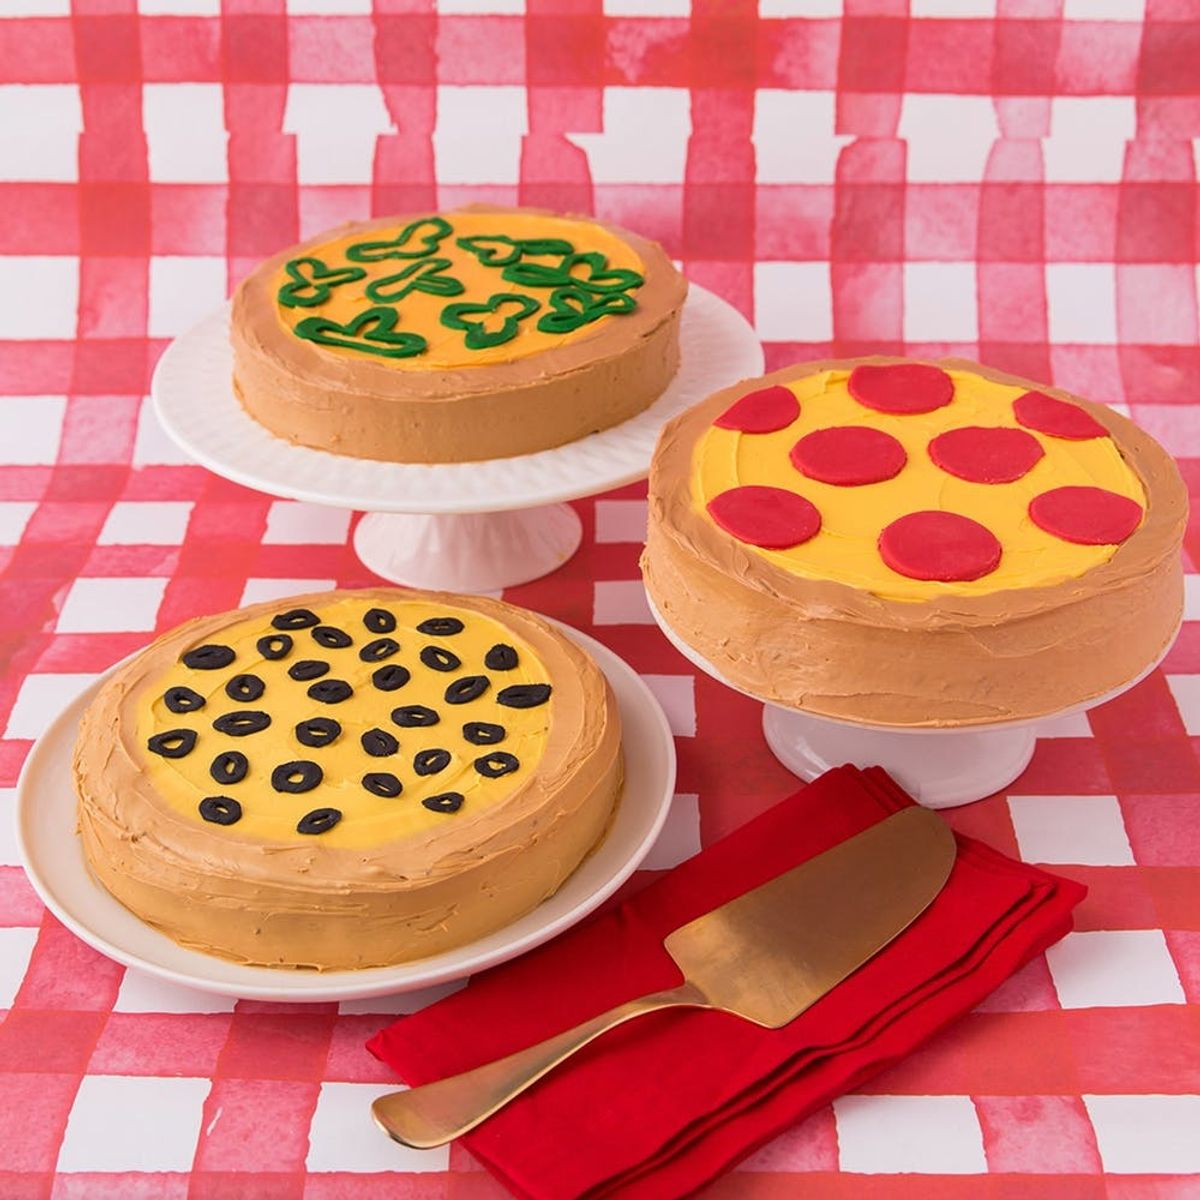 This Pizza Cake Recipe Is a Piece of Cake to Bake